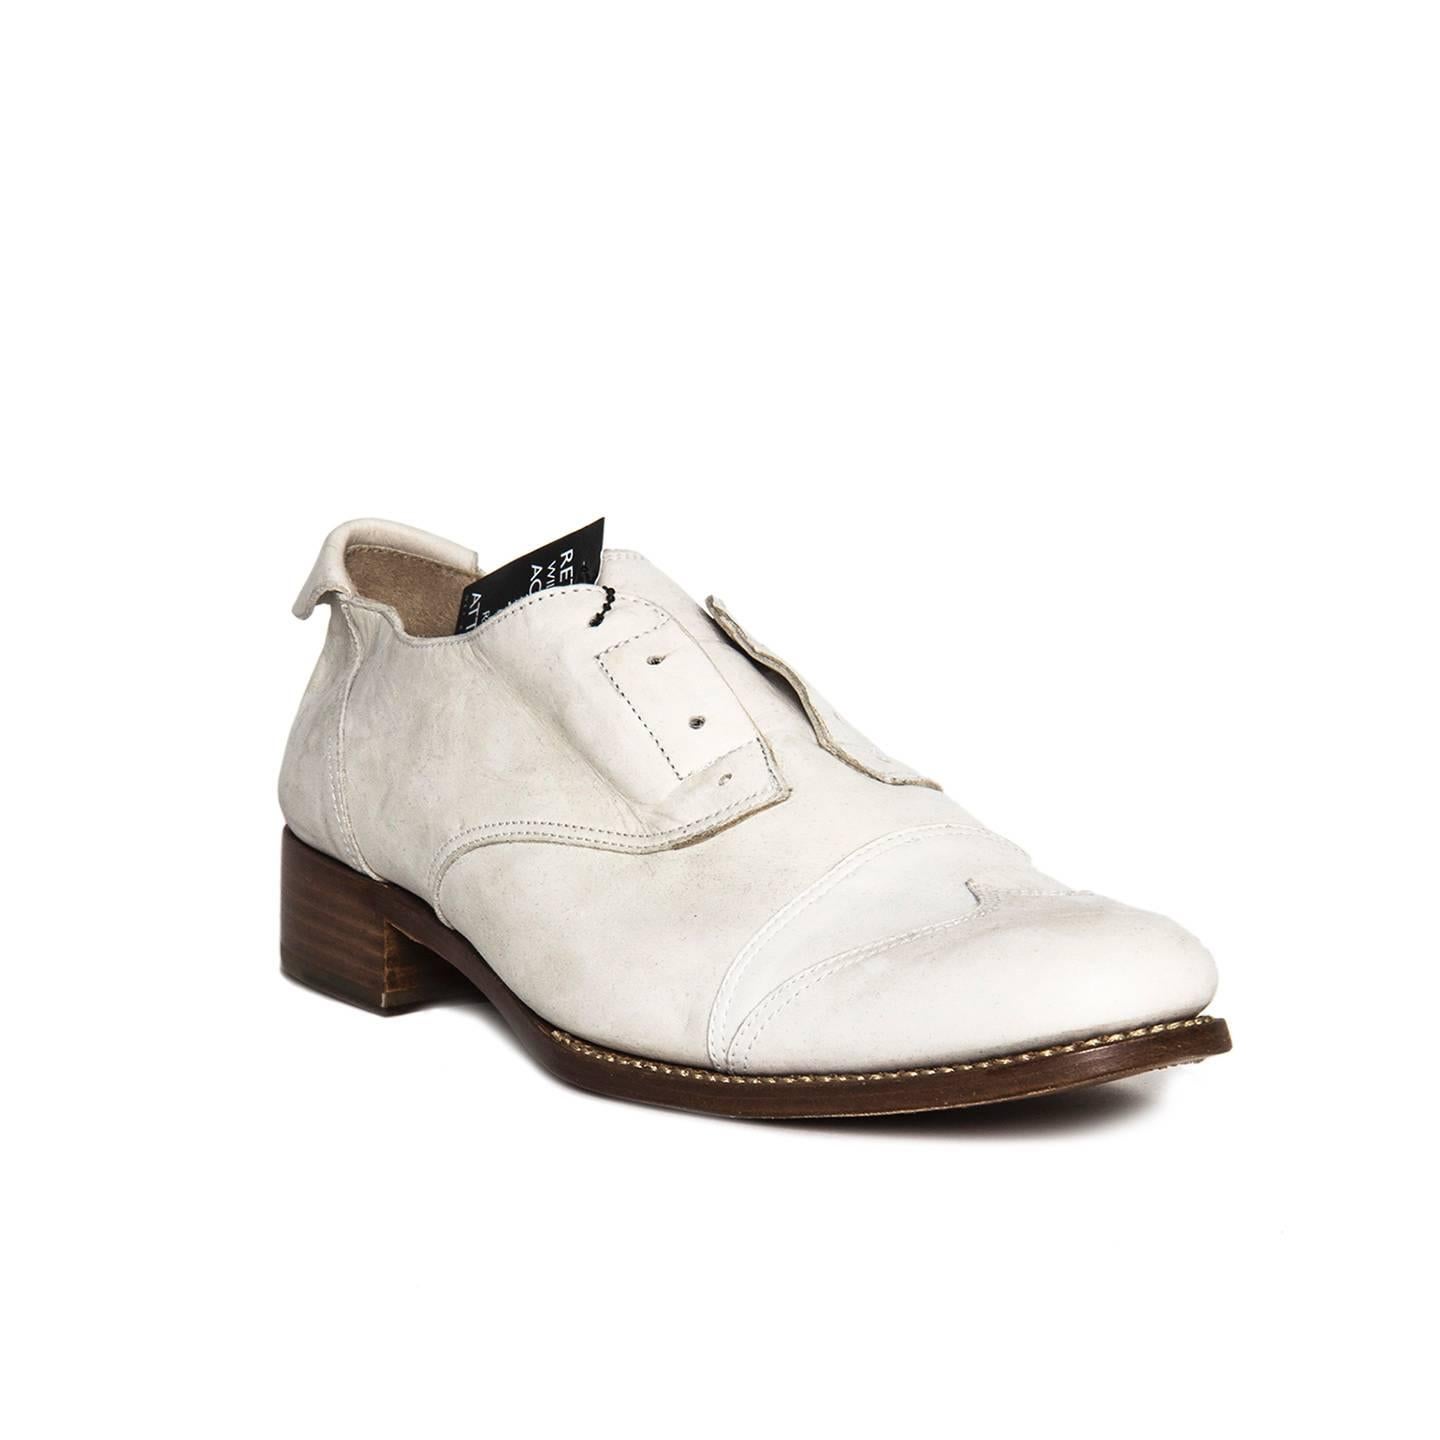 Man style off white leather slip-on brogues with no laces, stitching detailing, ankle pull on tab and brown heel and sole. Vero cuoio. Made in Spain. Heel 1